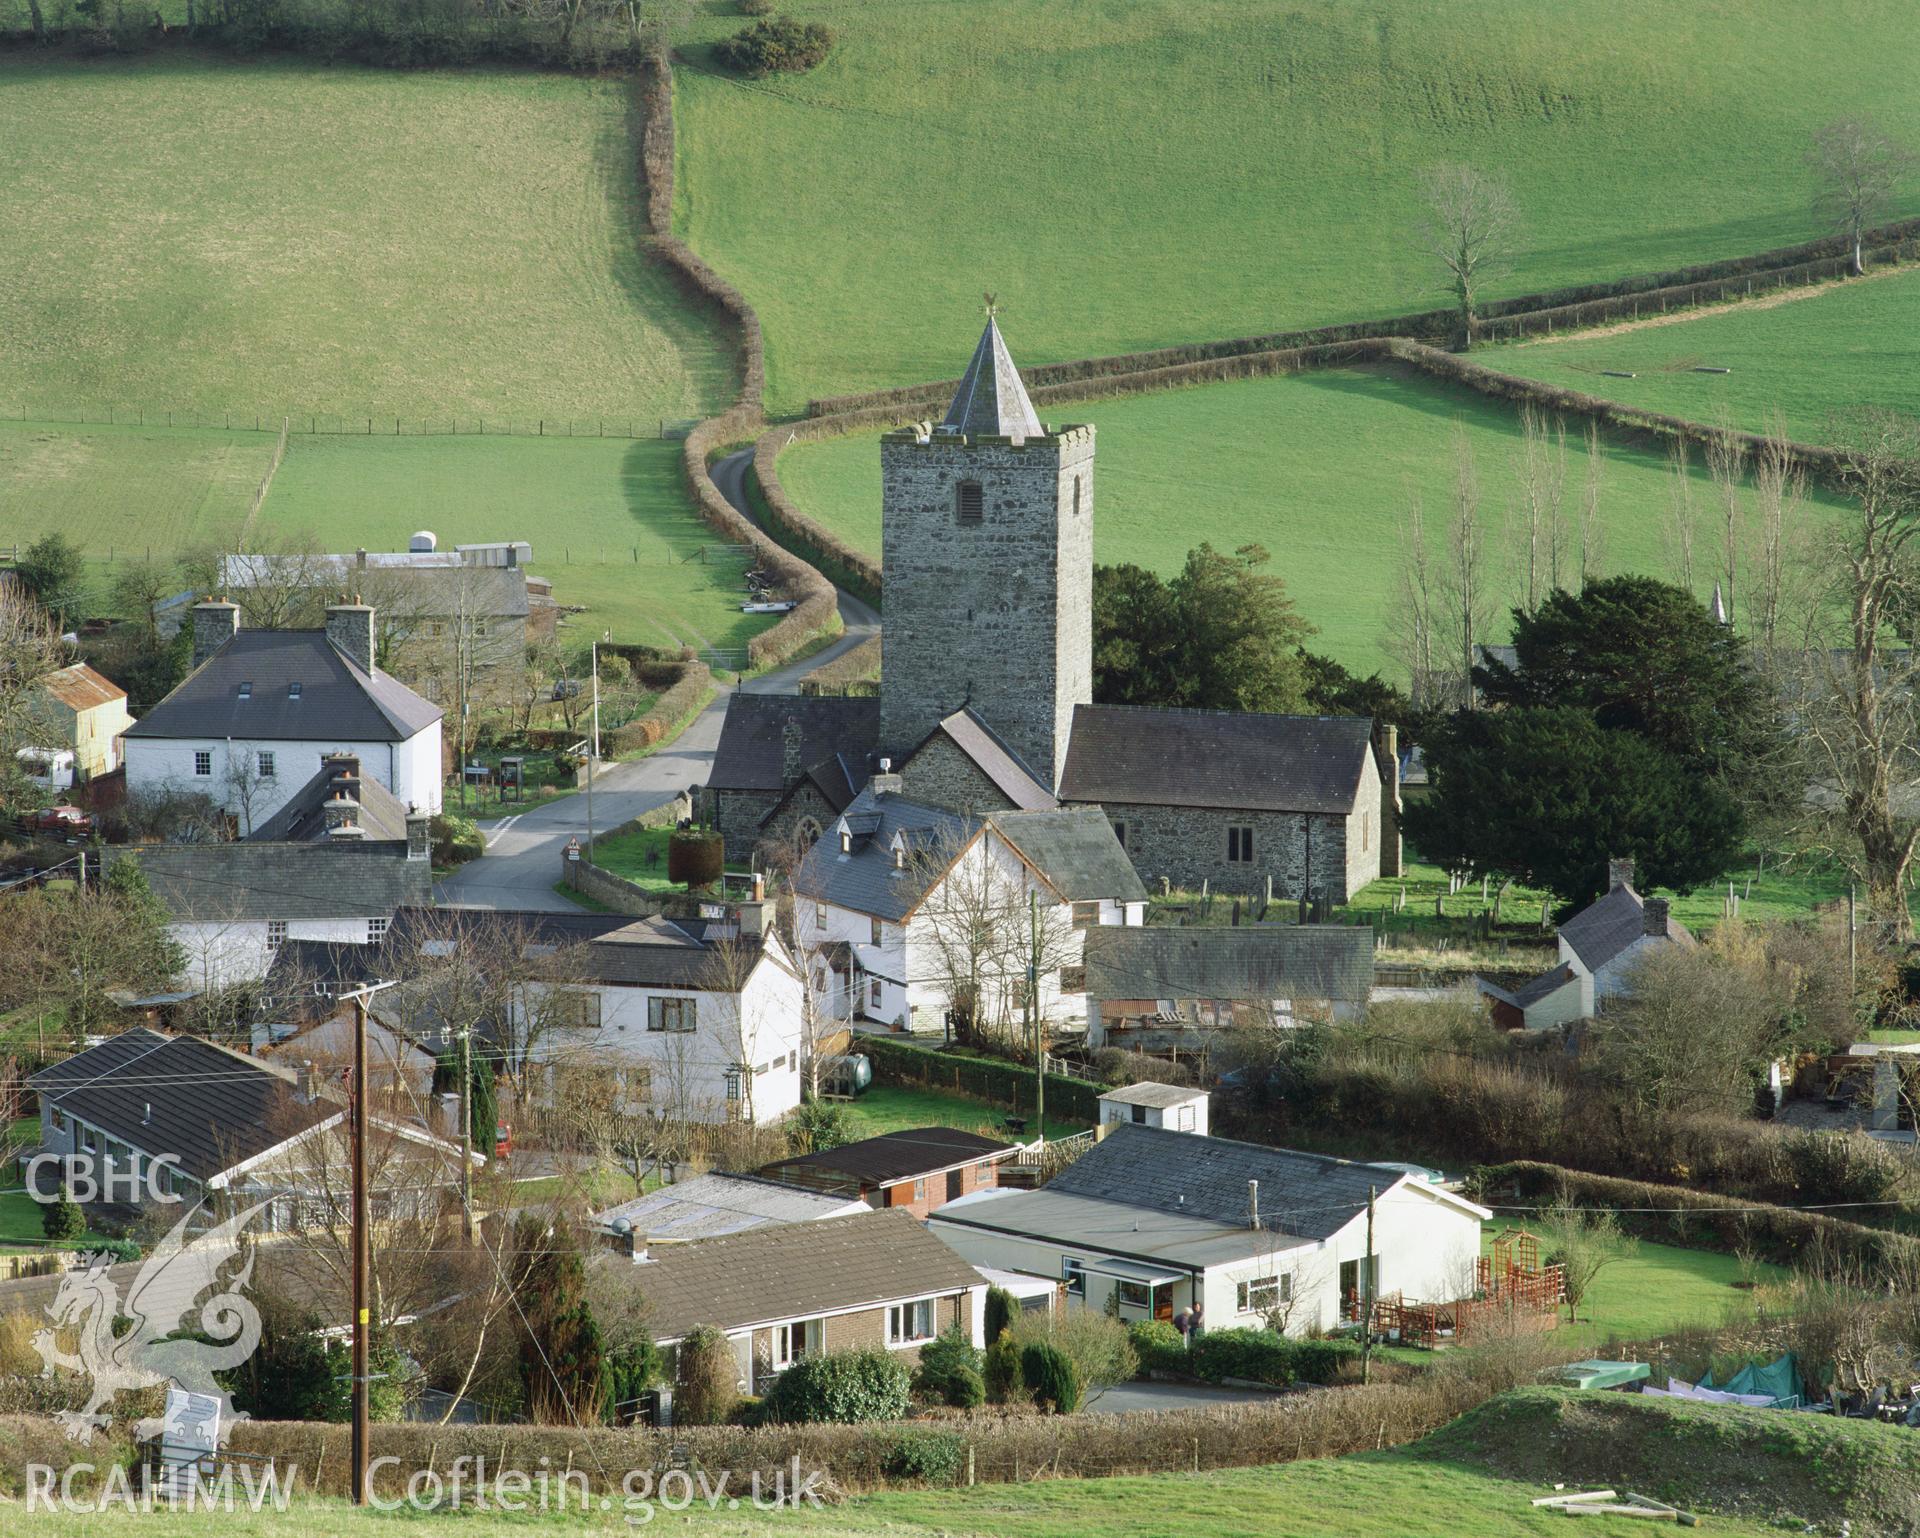 Colour transparency showing a general view of Llanfihangel y Creuddyn, produced by Iain Wright, June 2004.